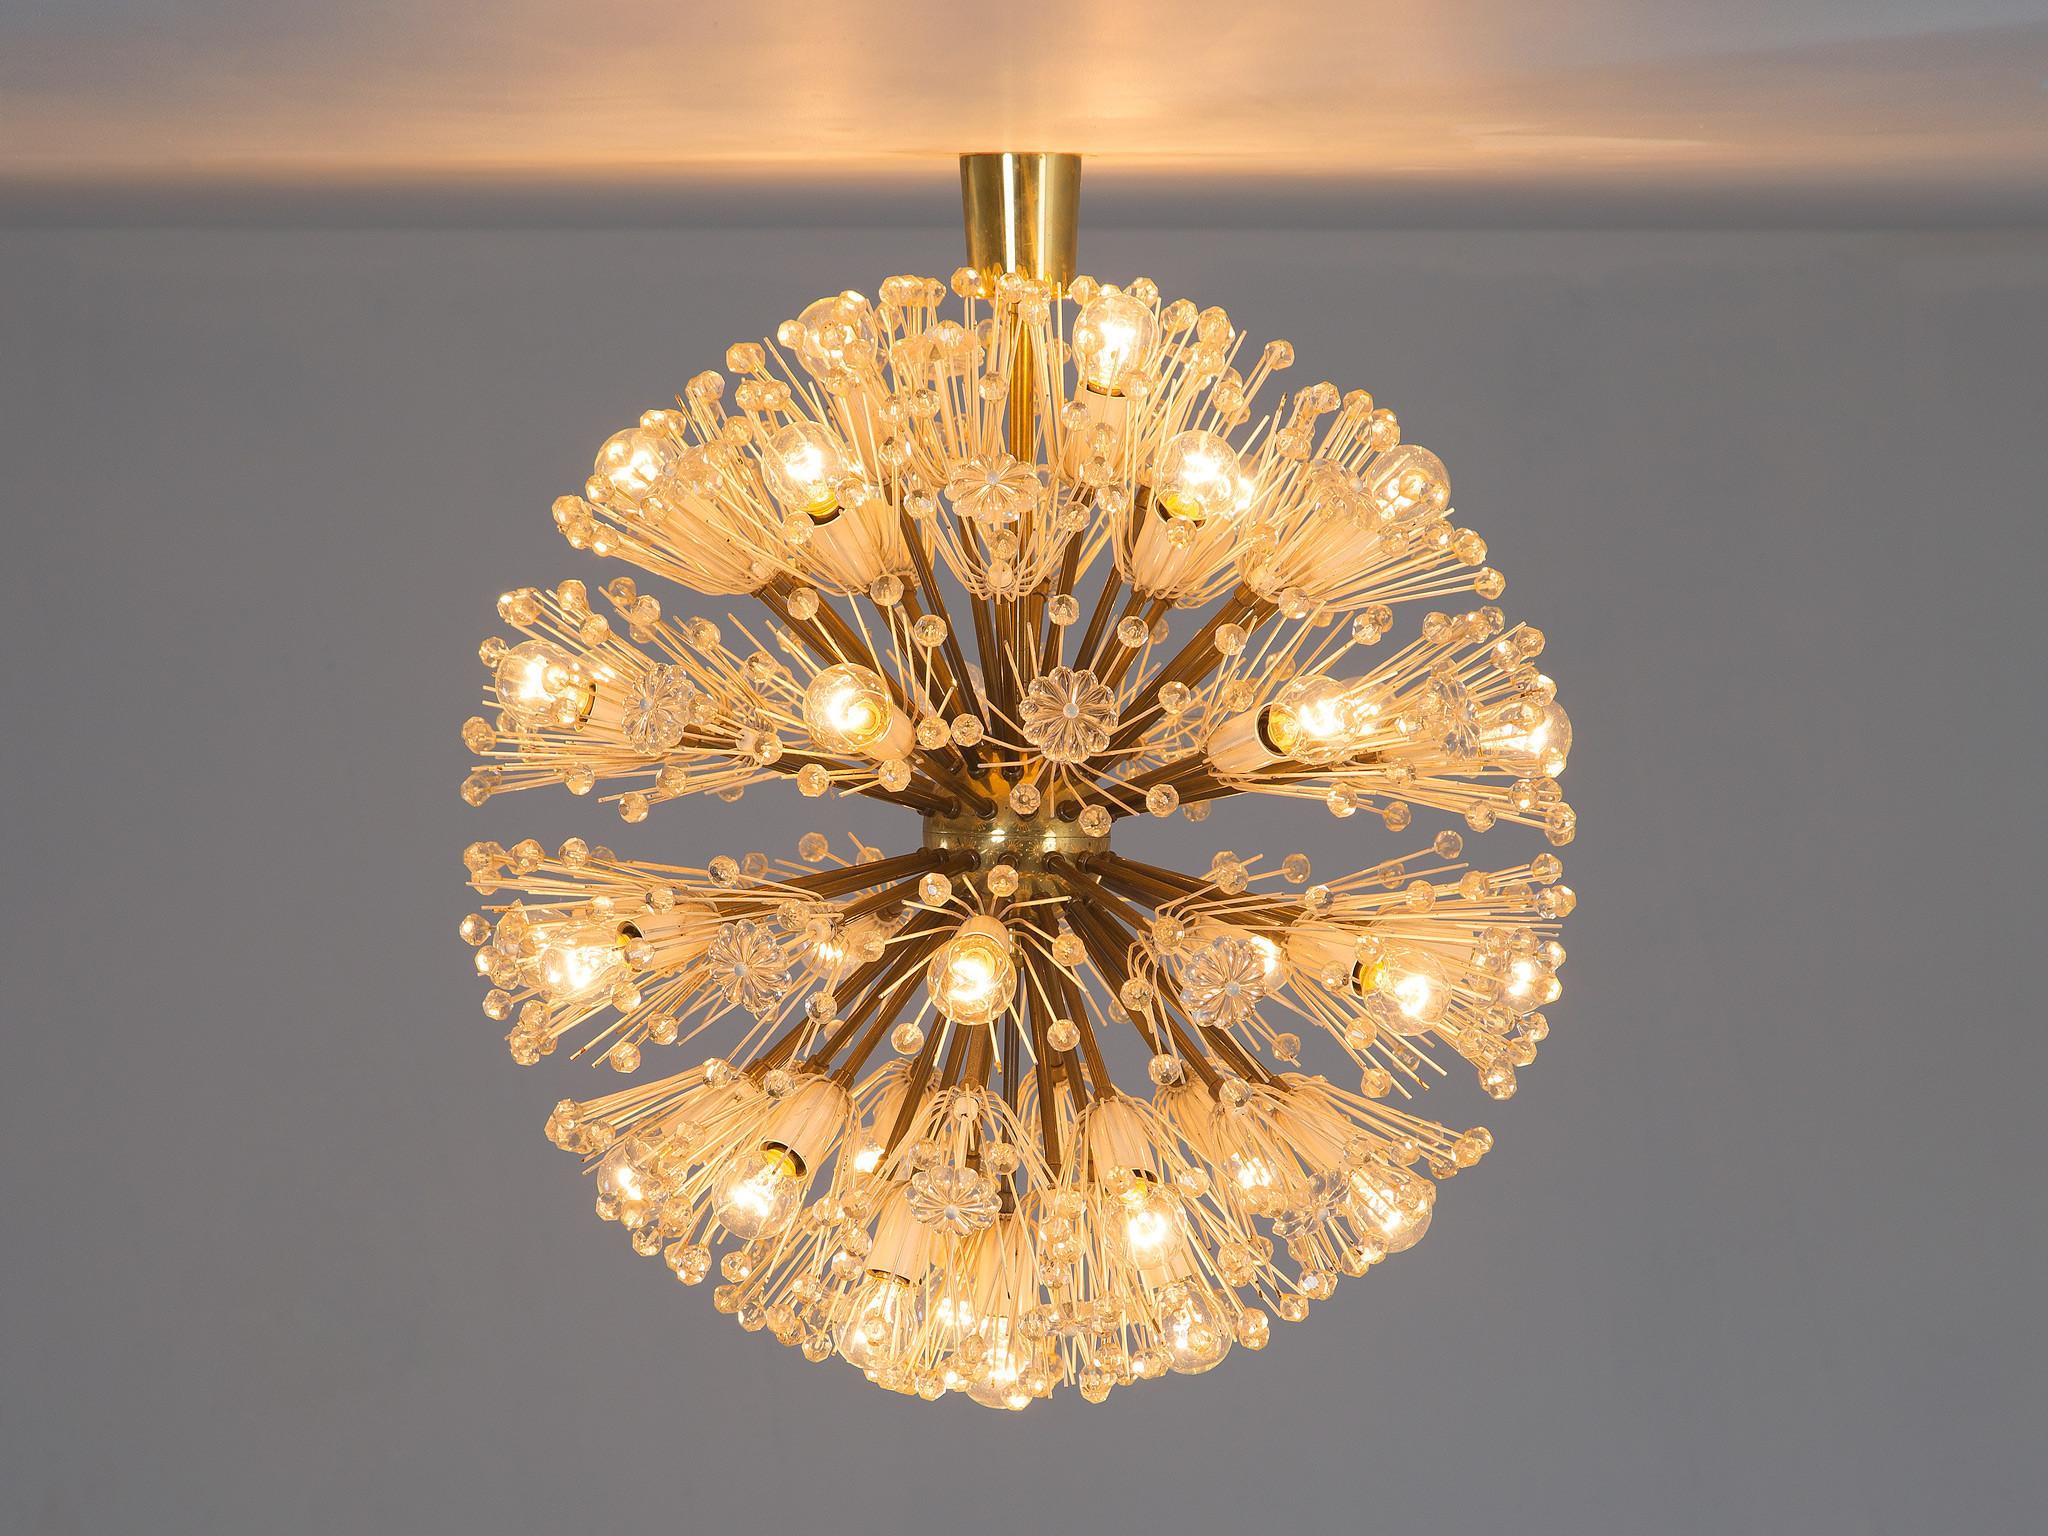 Emil Stejnar for Rupert Nikoll, Sputnik chandelier, brass, glass, Austria, 1960s 

Very rare large pendant light by Emil Stejnar. Round like a ball this 'Sputnik' chandelier consists of a center sphere from which many rods with glass spheres at